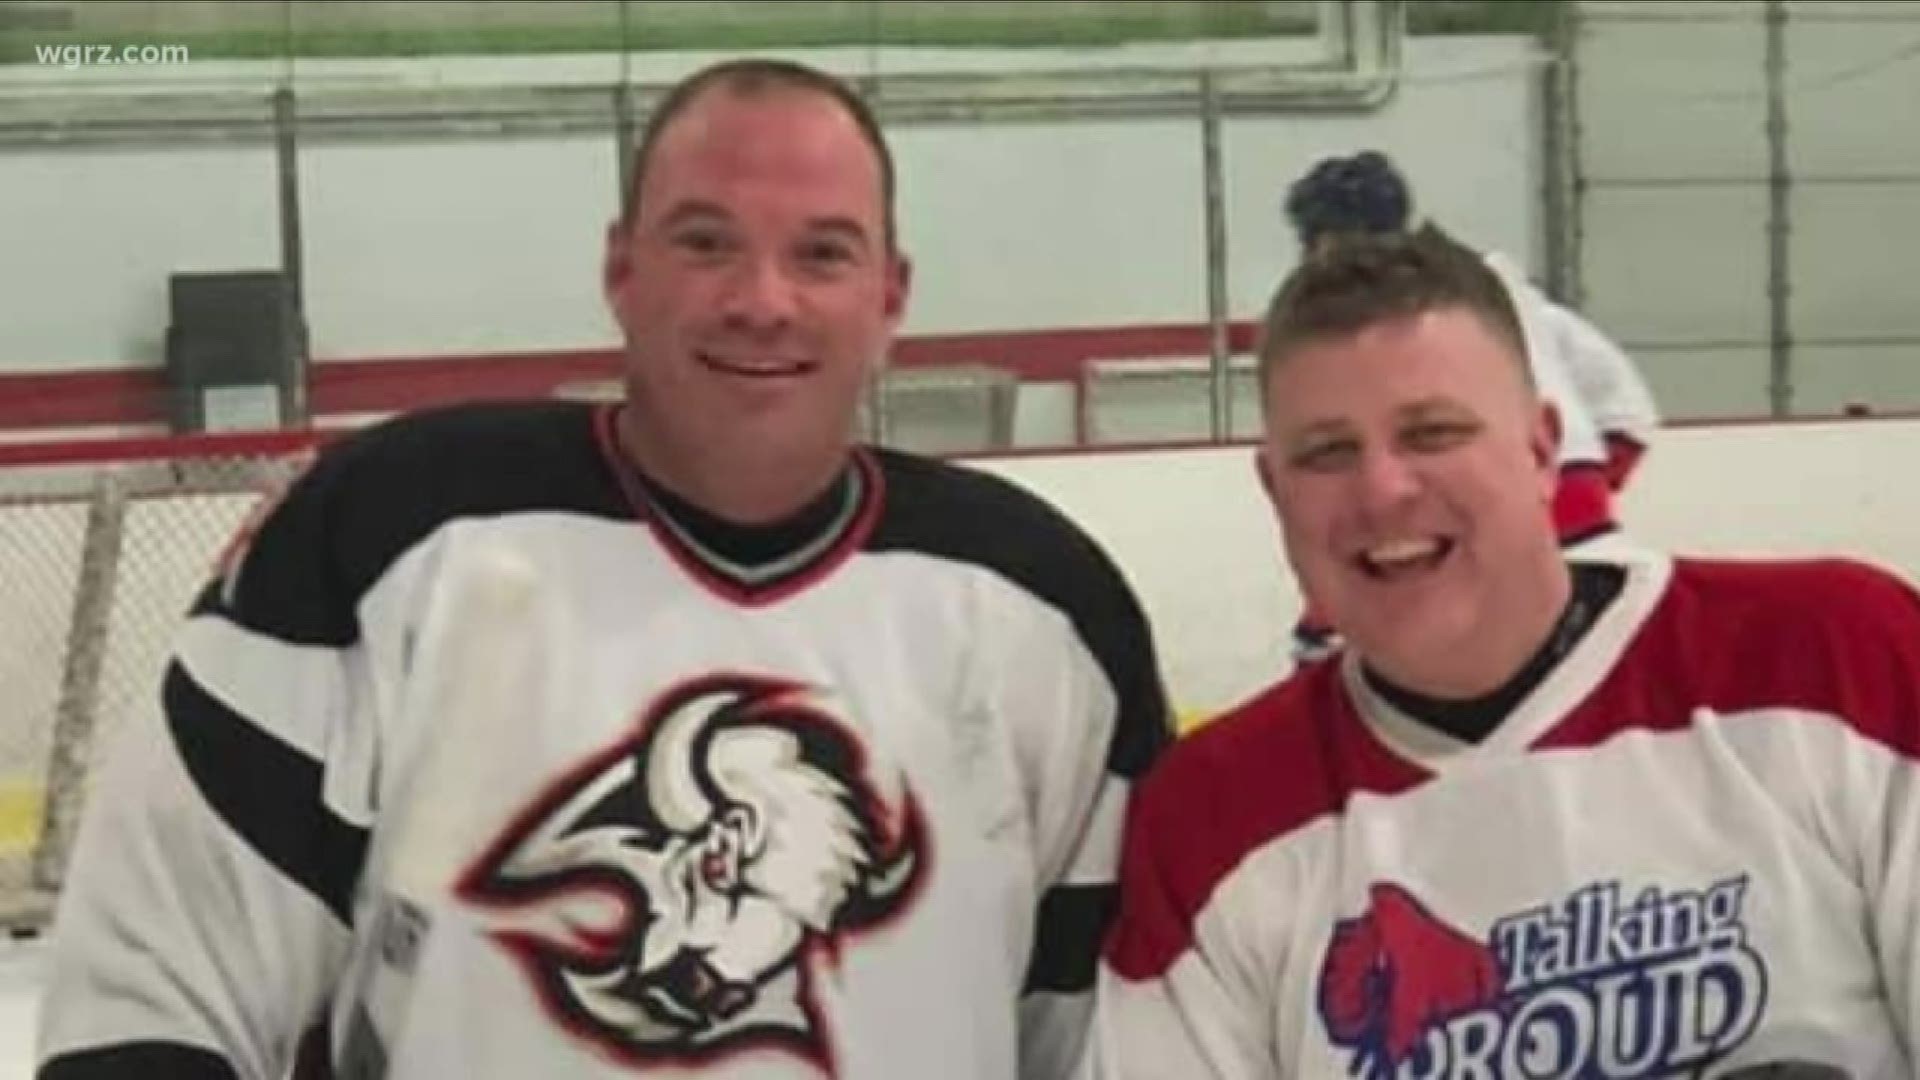 Organizers of the 11 Day Power Play took an emotional blow a few months back with the sudden passing of one of the original board members, making the event's mission all the more meaningful.